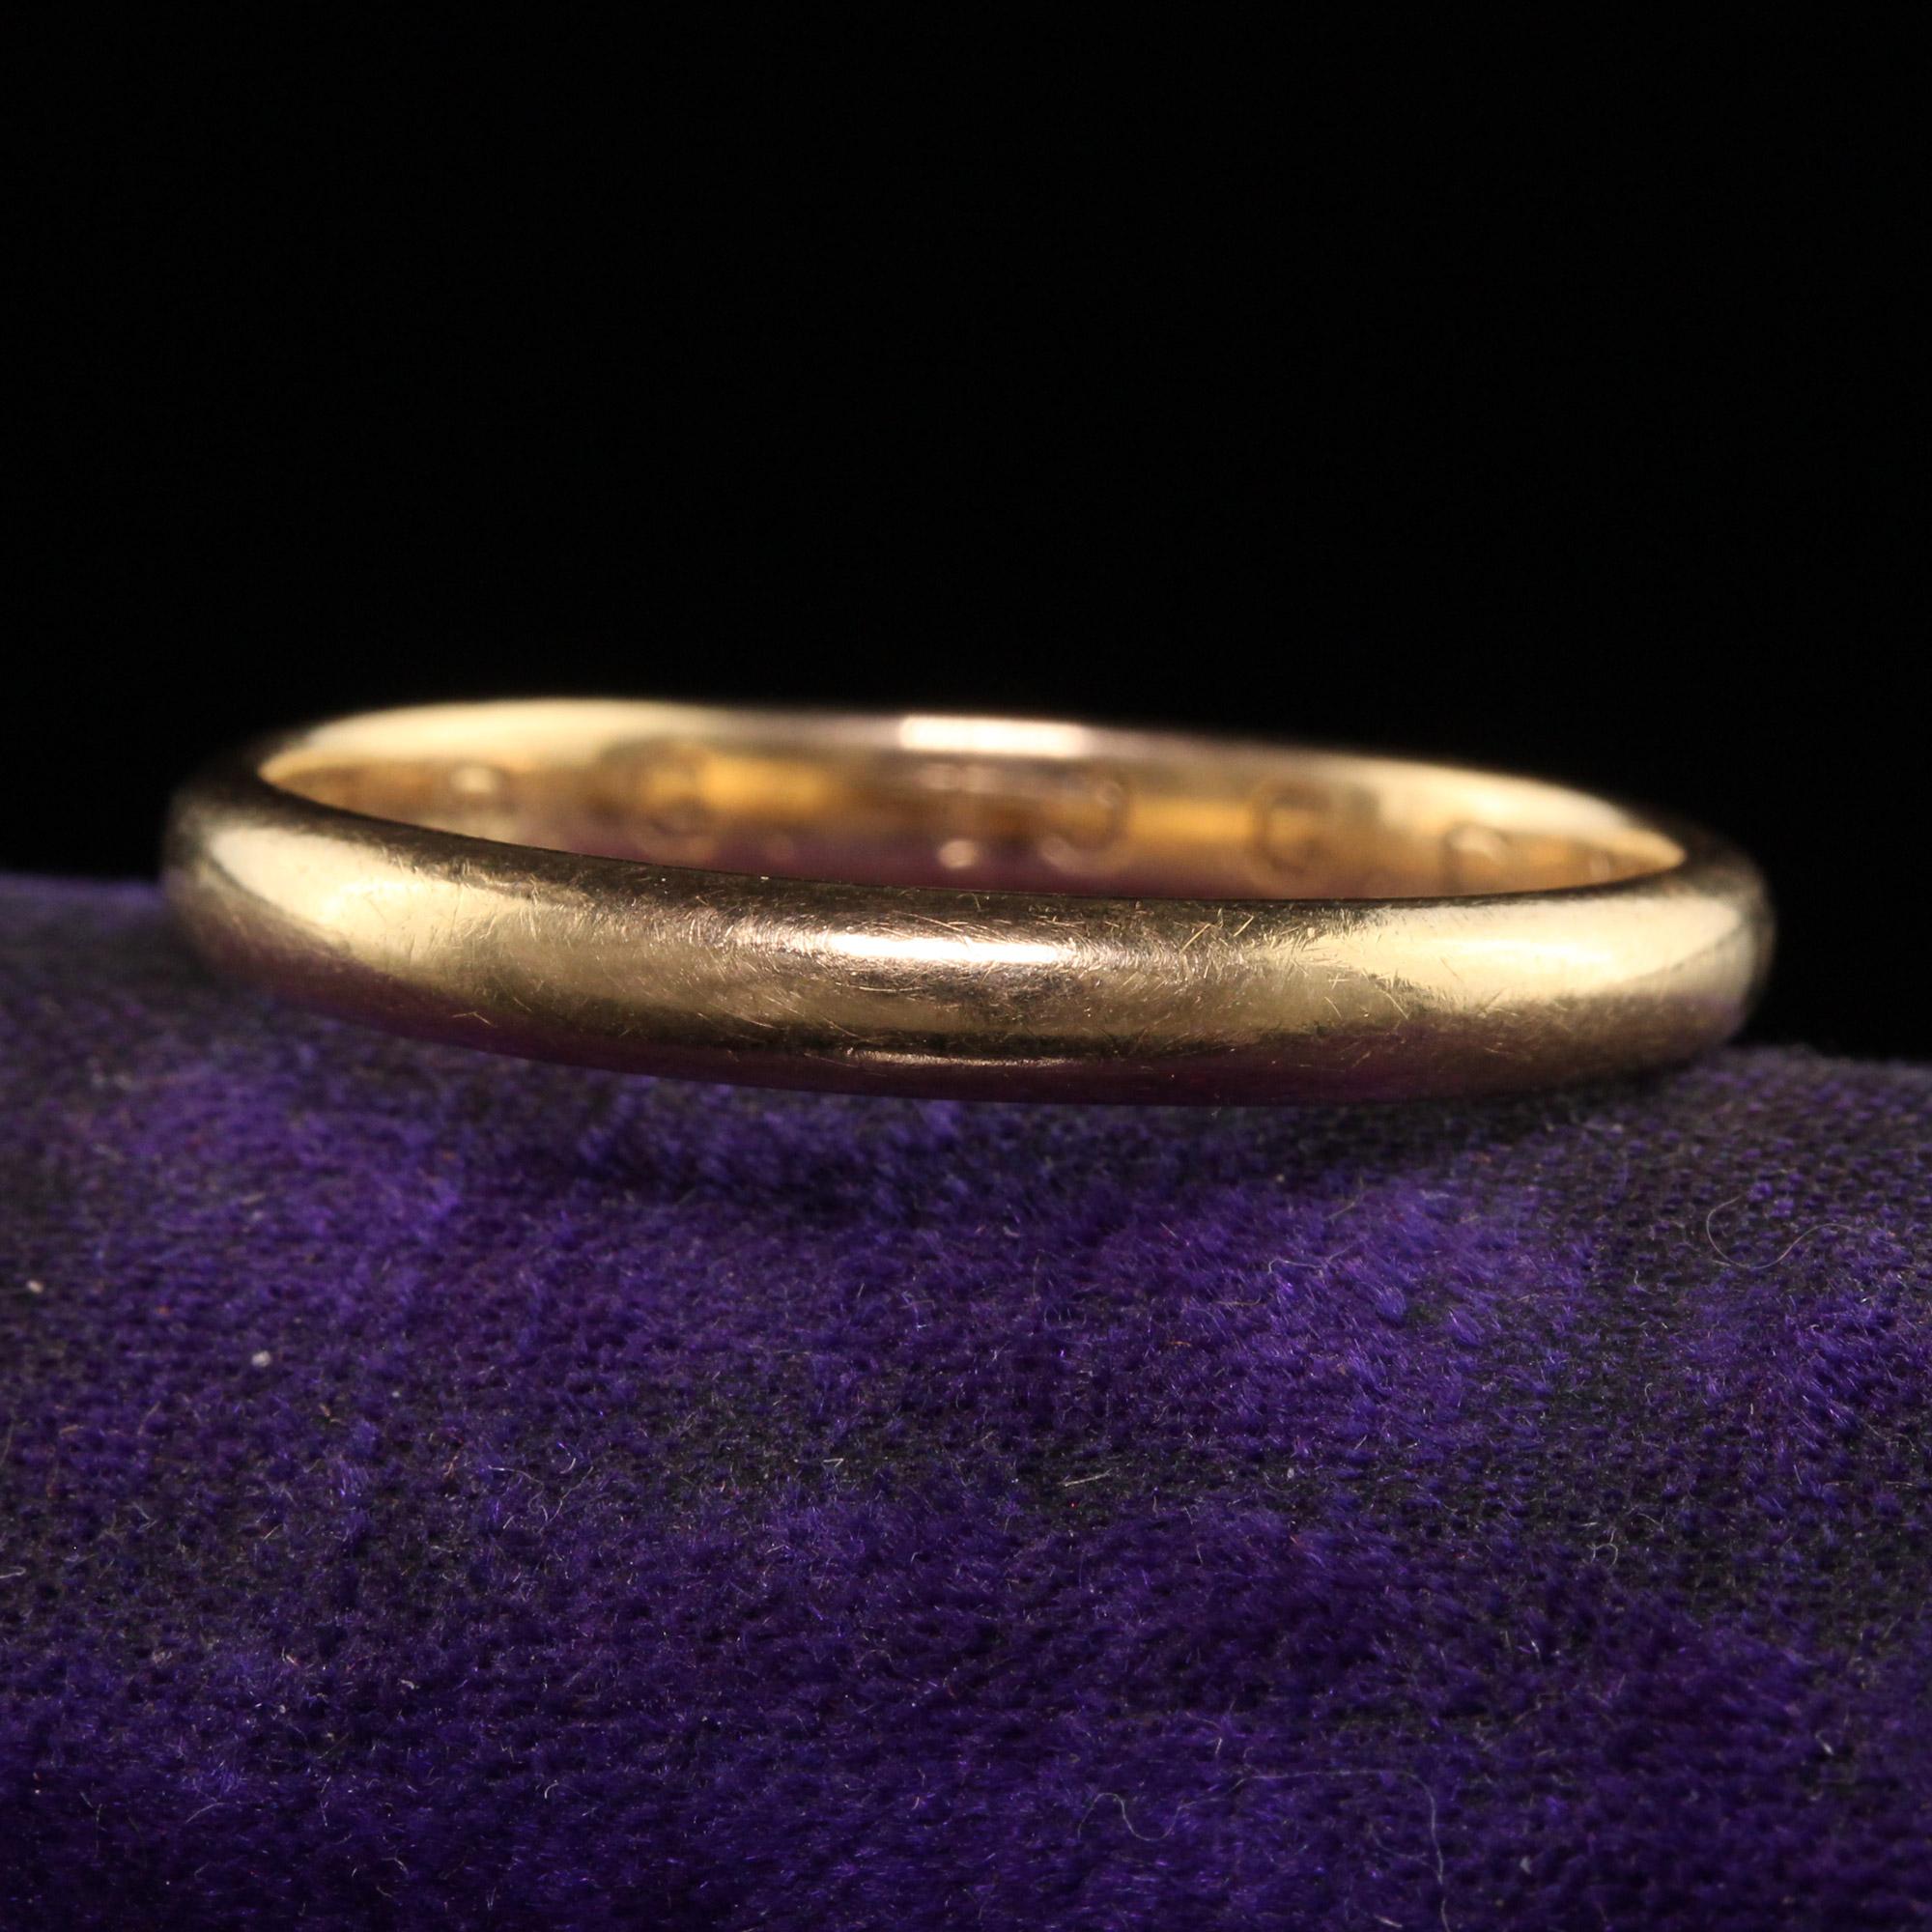 Beautiful Antique Art Deco 18K Yellow Gold Classic Engraved Wedding Band - Size 13. This classic wedding band is crafted in 18k yellow gold. The inside of the band is engraved D. G. to G. C. 12. 28. 27.